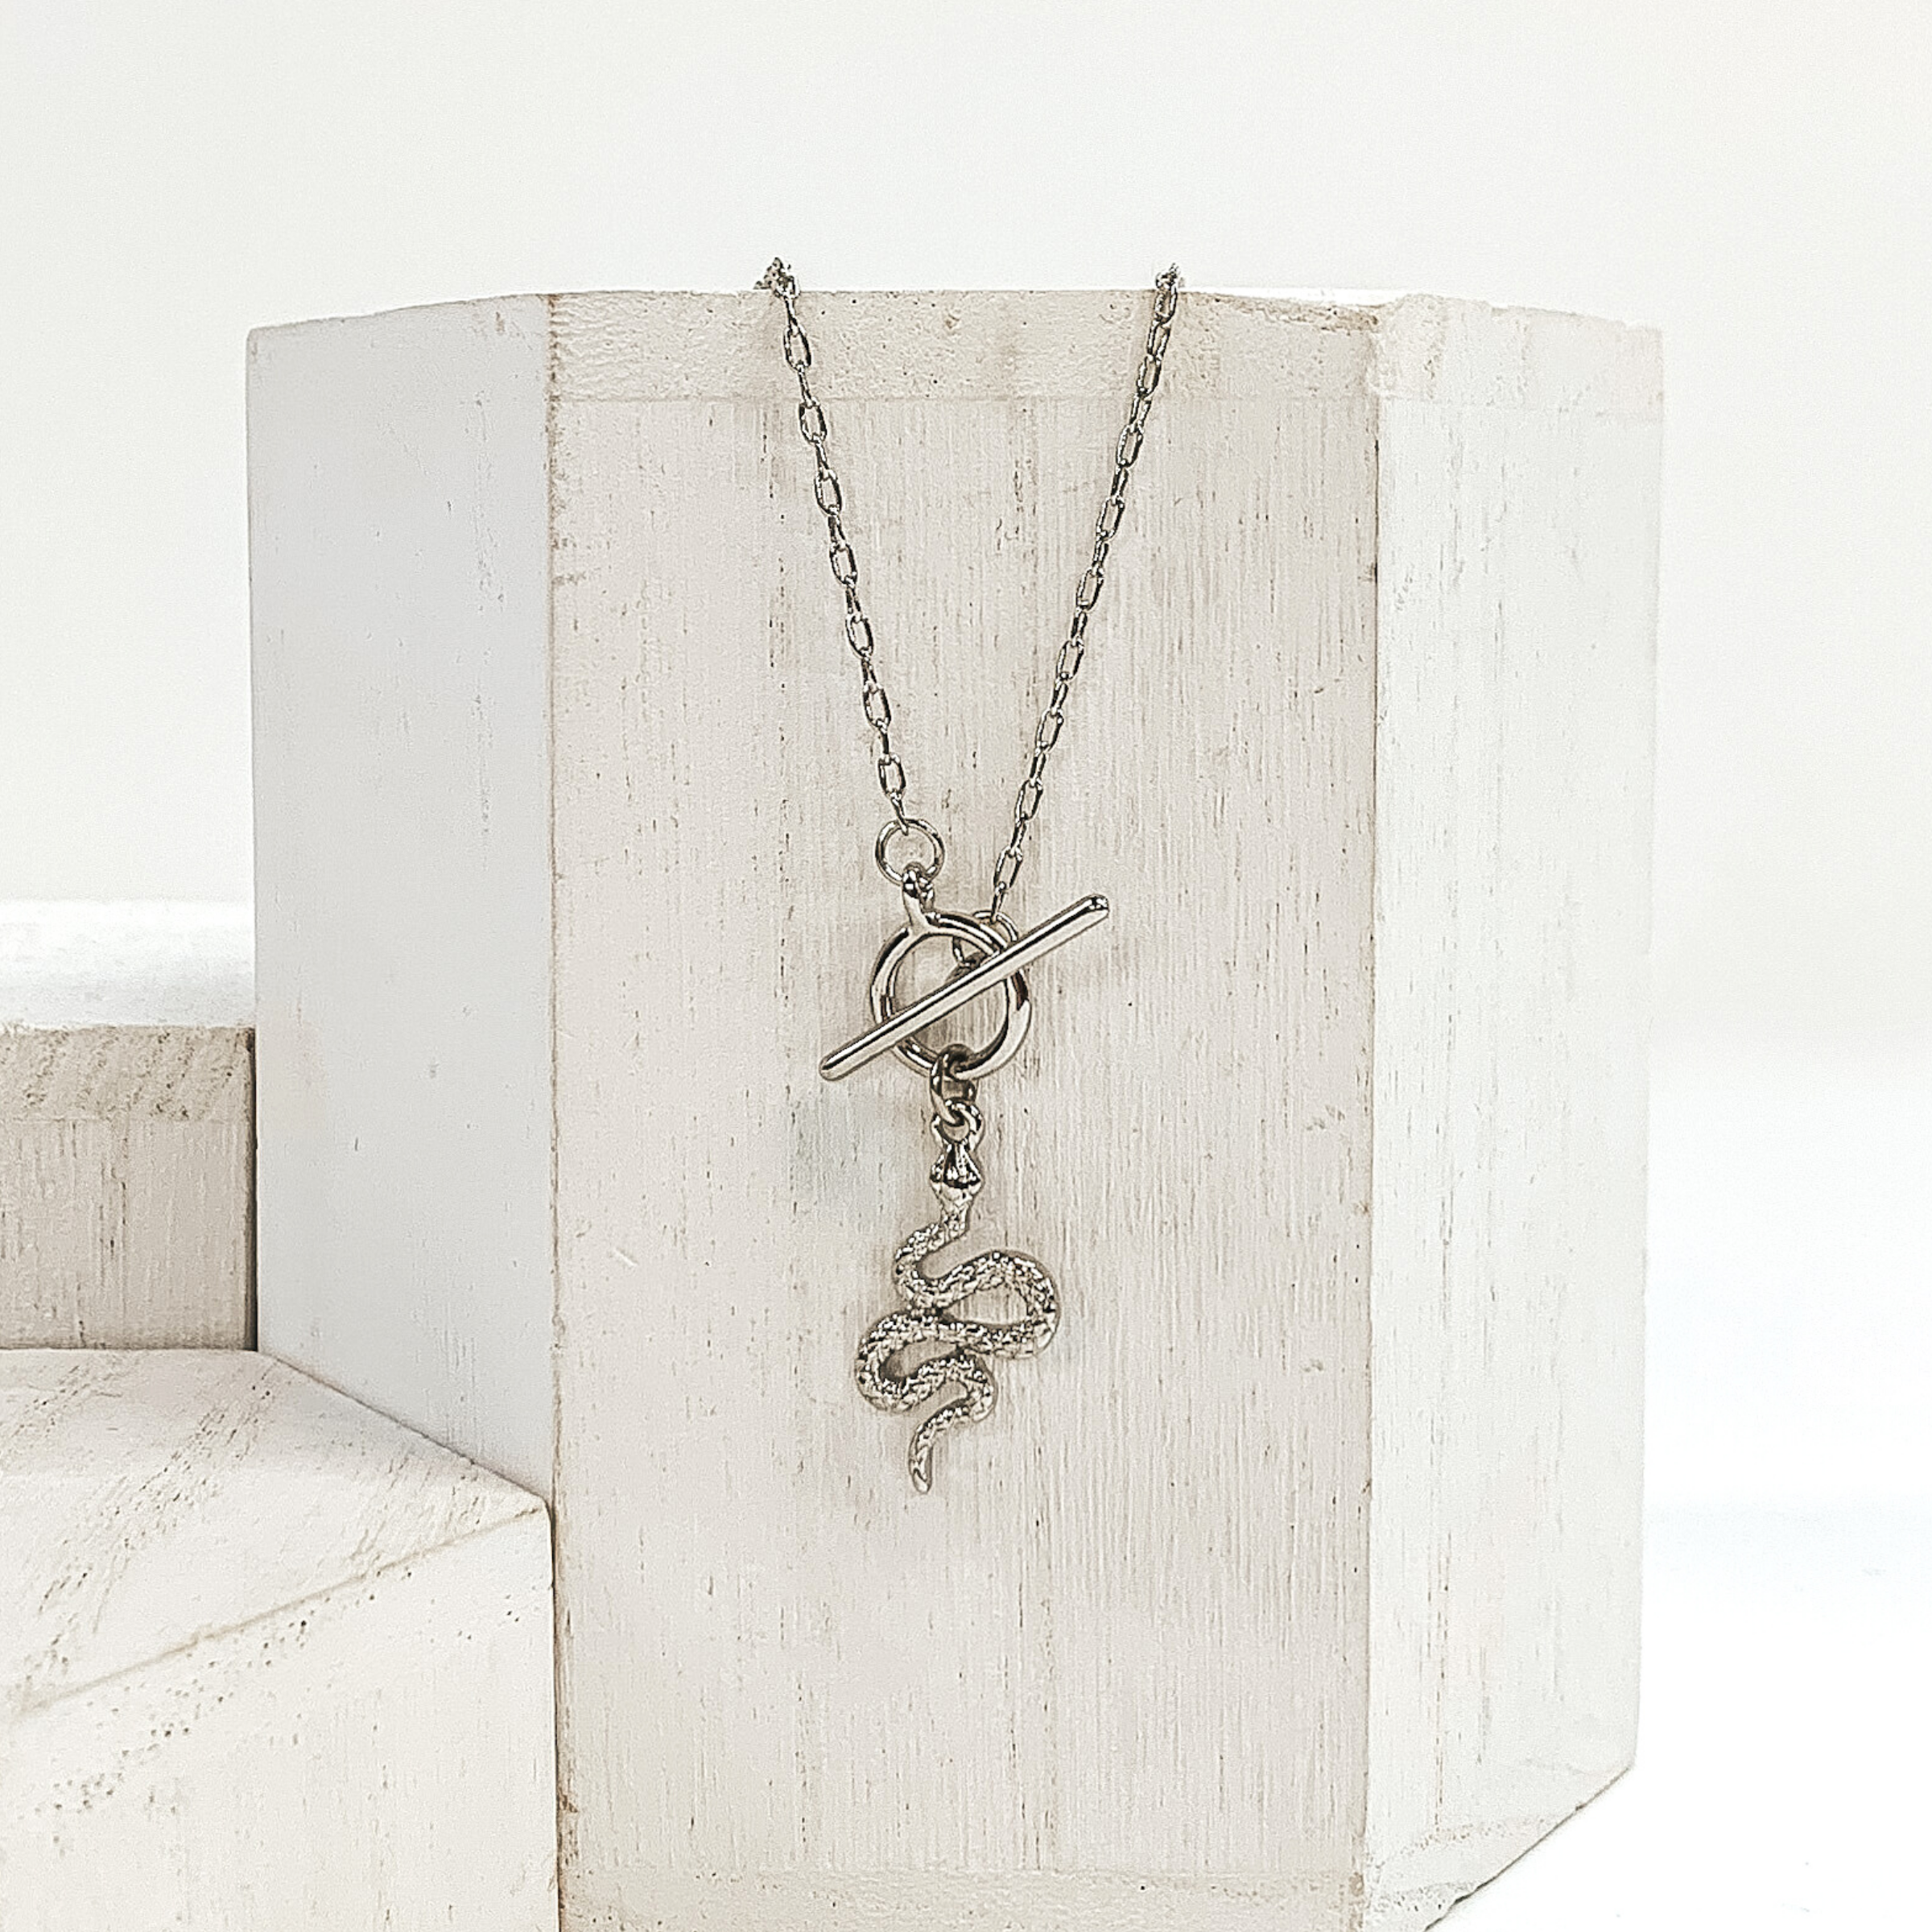 This is a silver necklace that has a front toggle clasp and a silver snake charm. This necklace is pictured laying on a white block and on a white background with other white blocks around it.